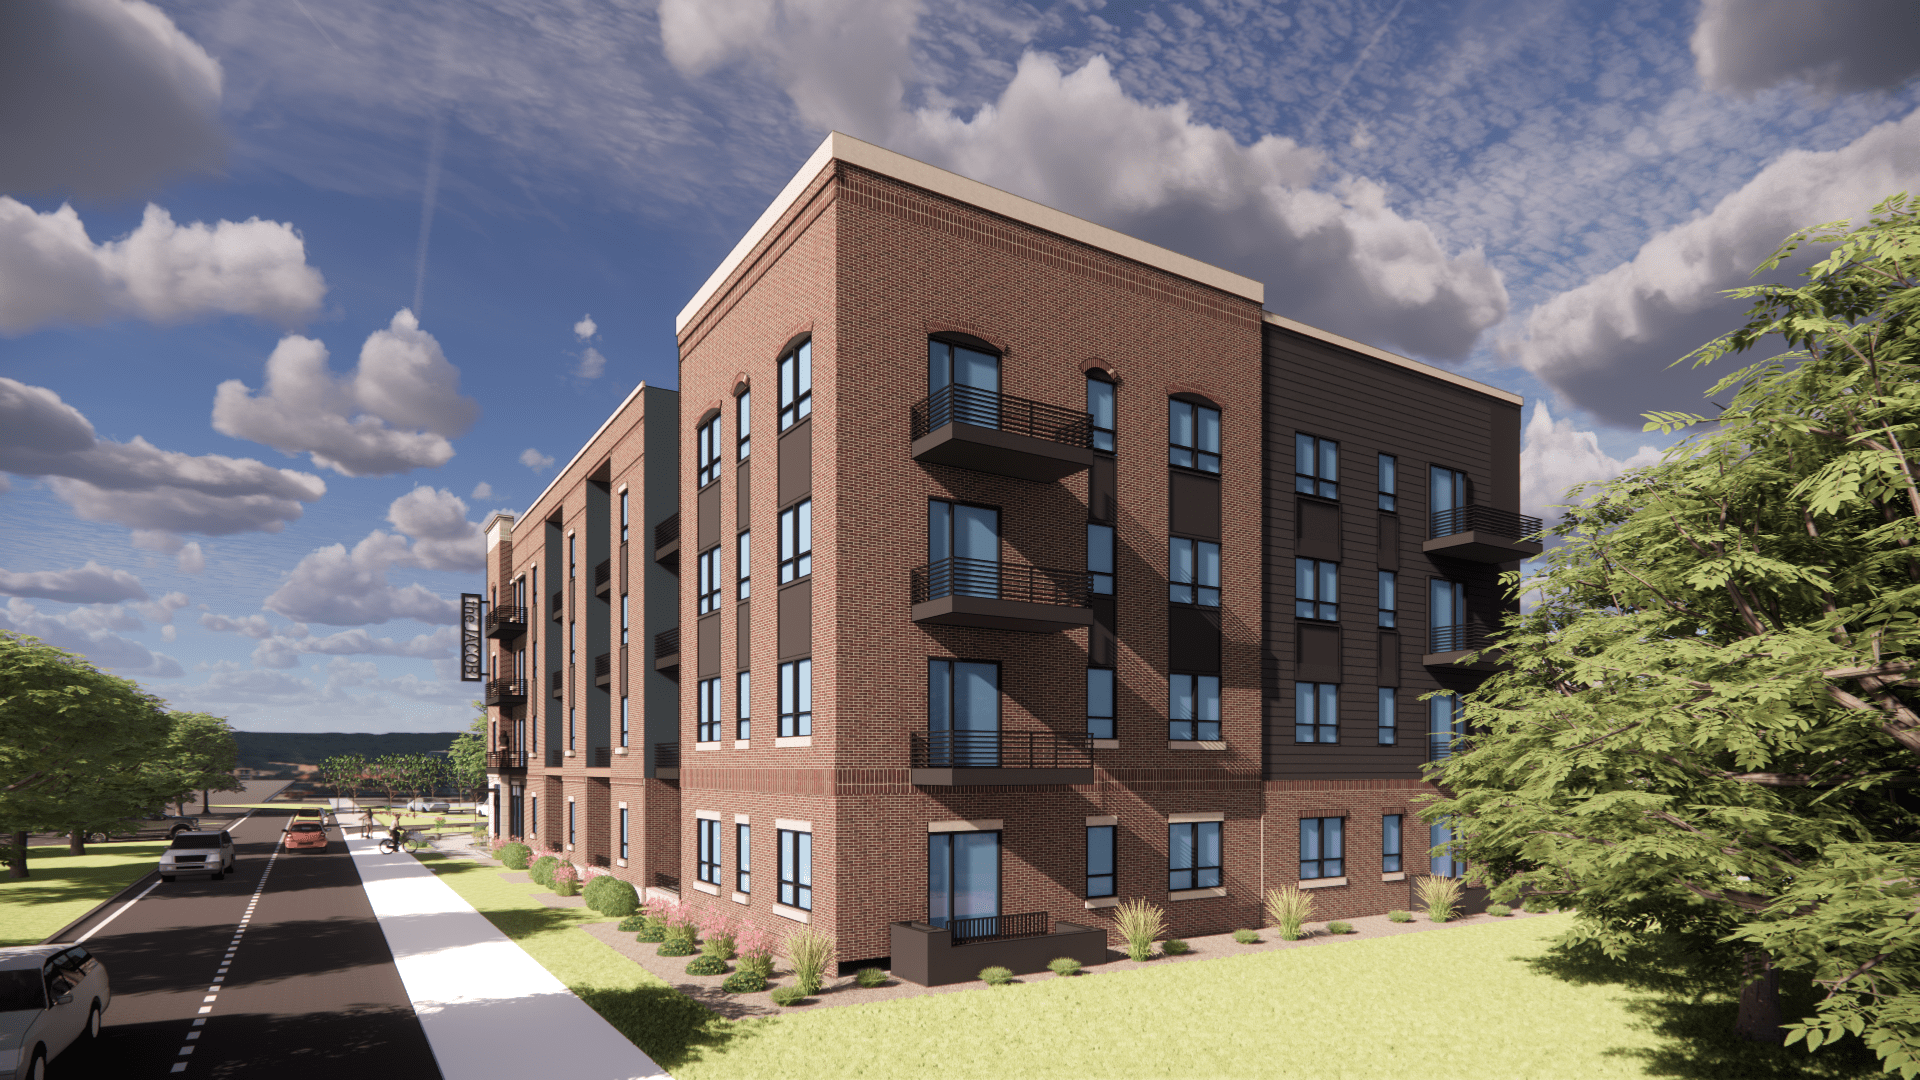 --Developers are about to build an $18 million apartment community